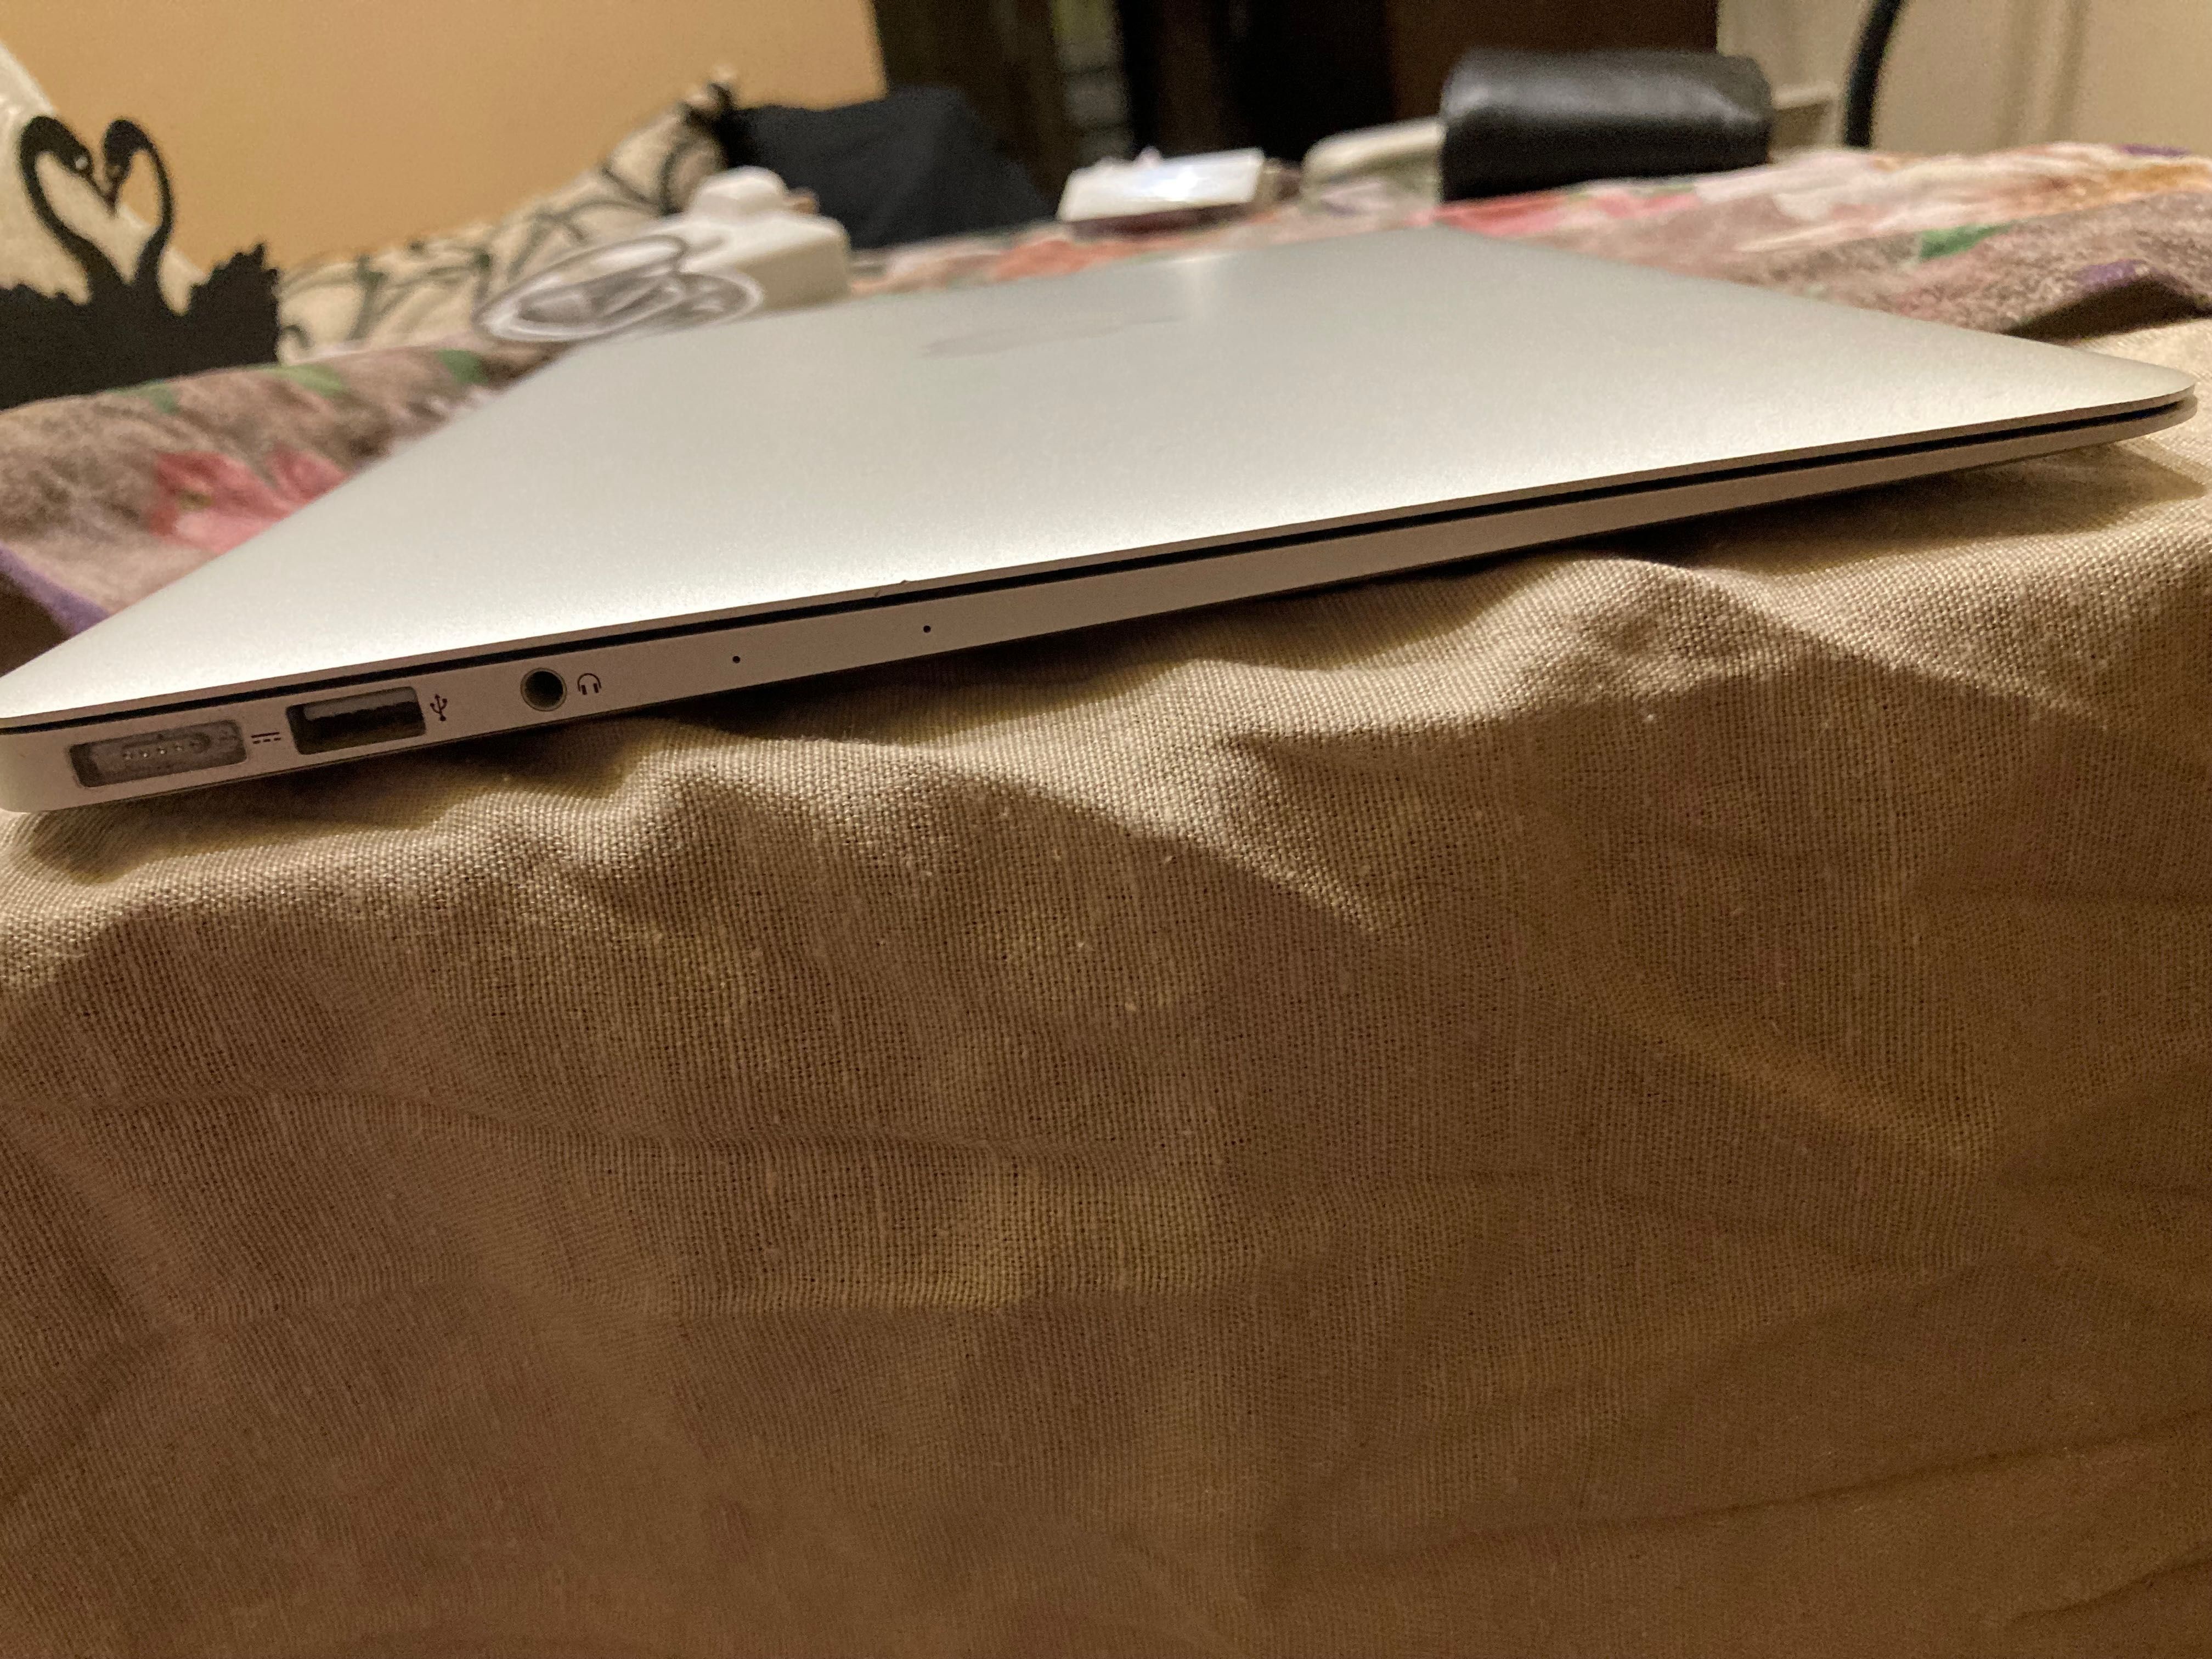 MacBook Air 11 Pro 13inch early 2014